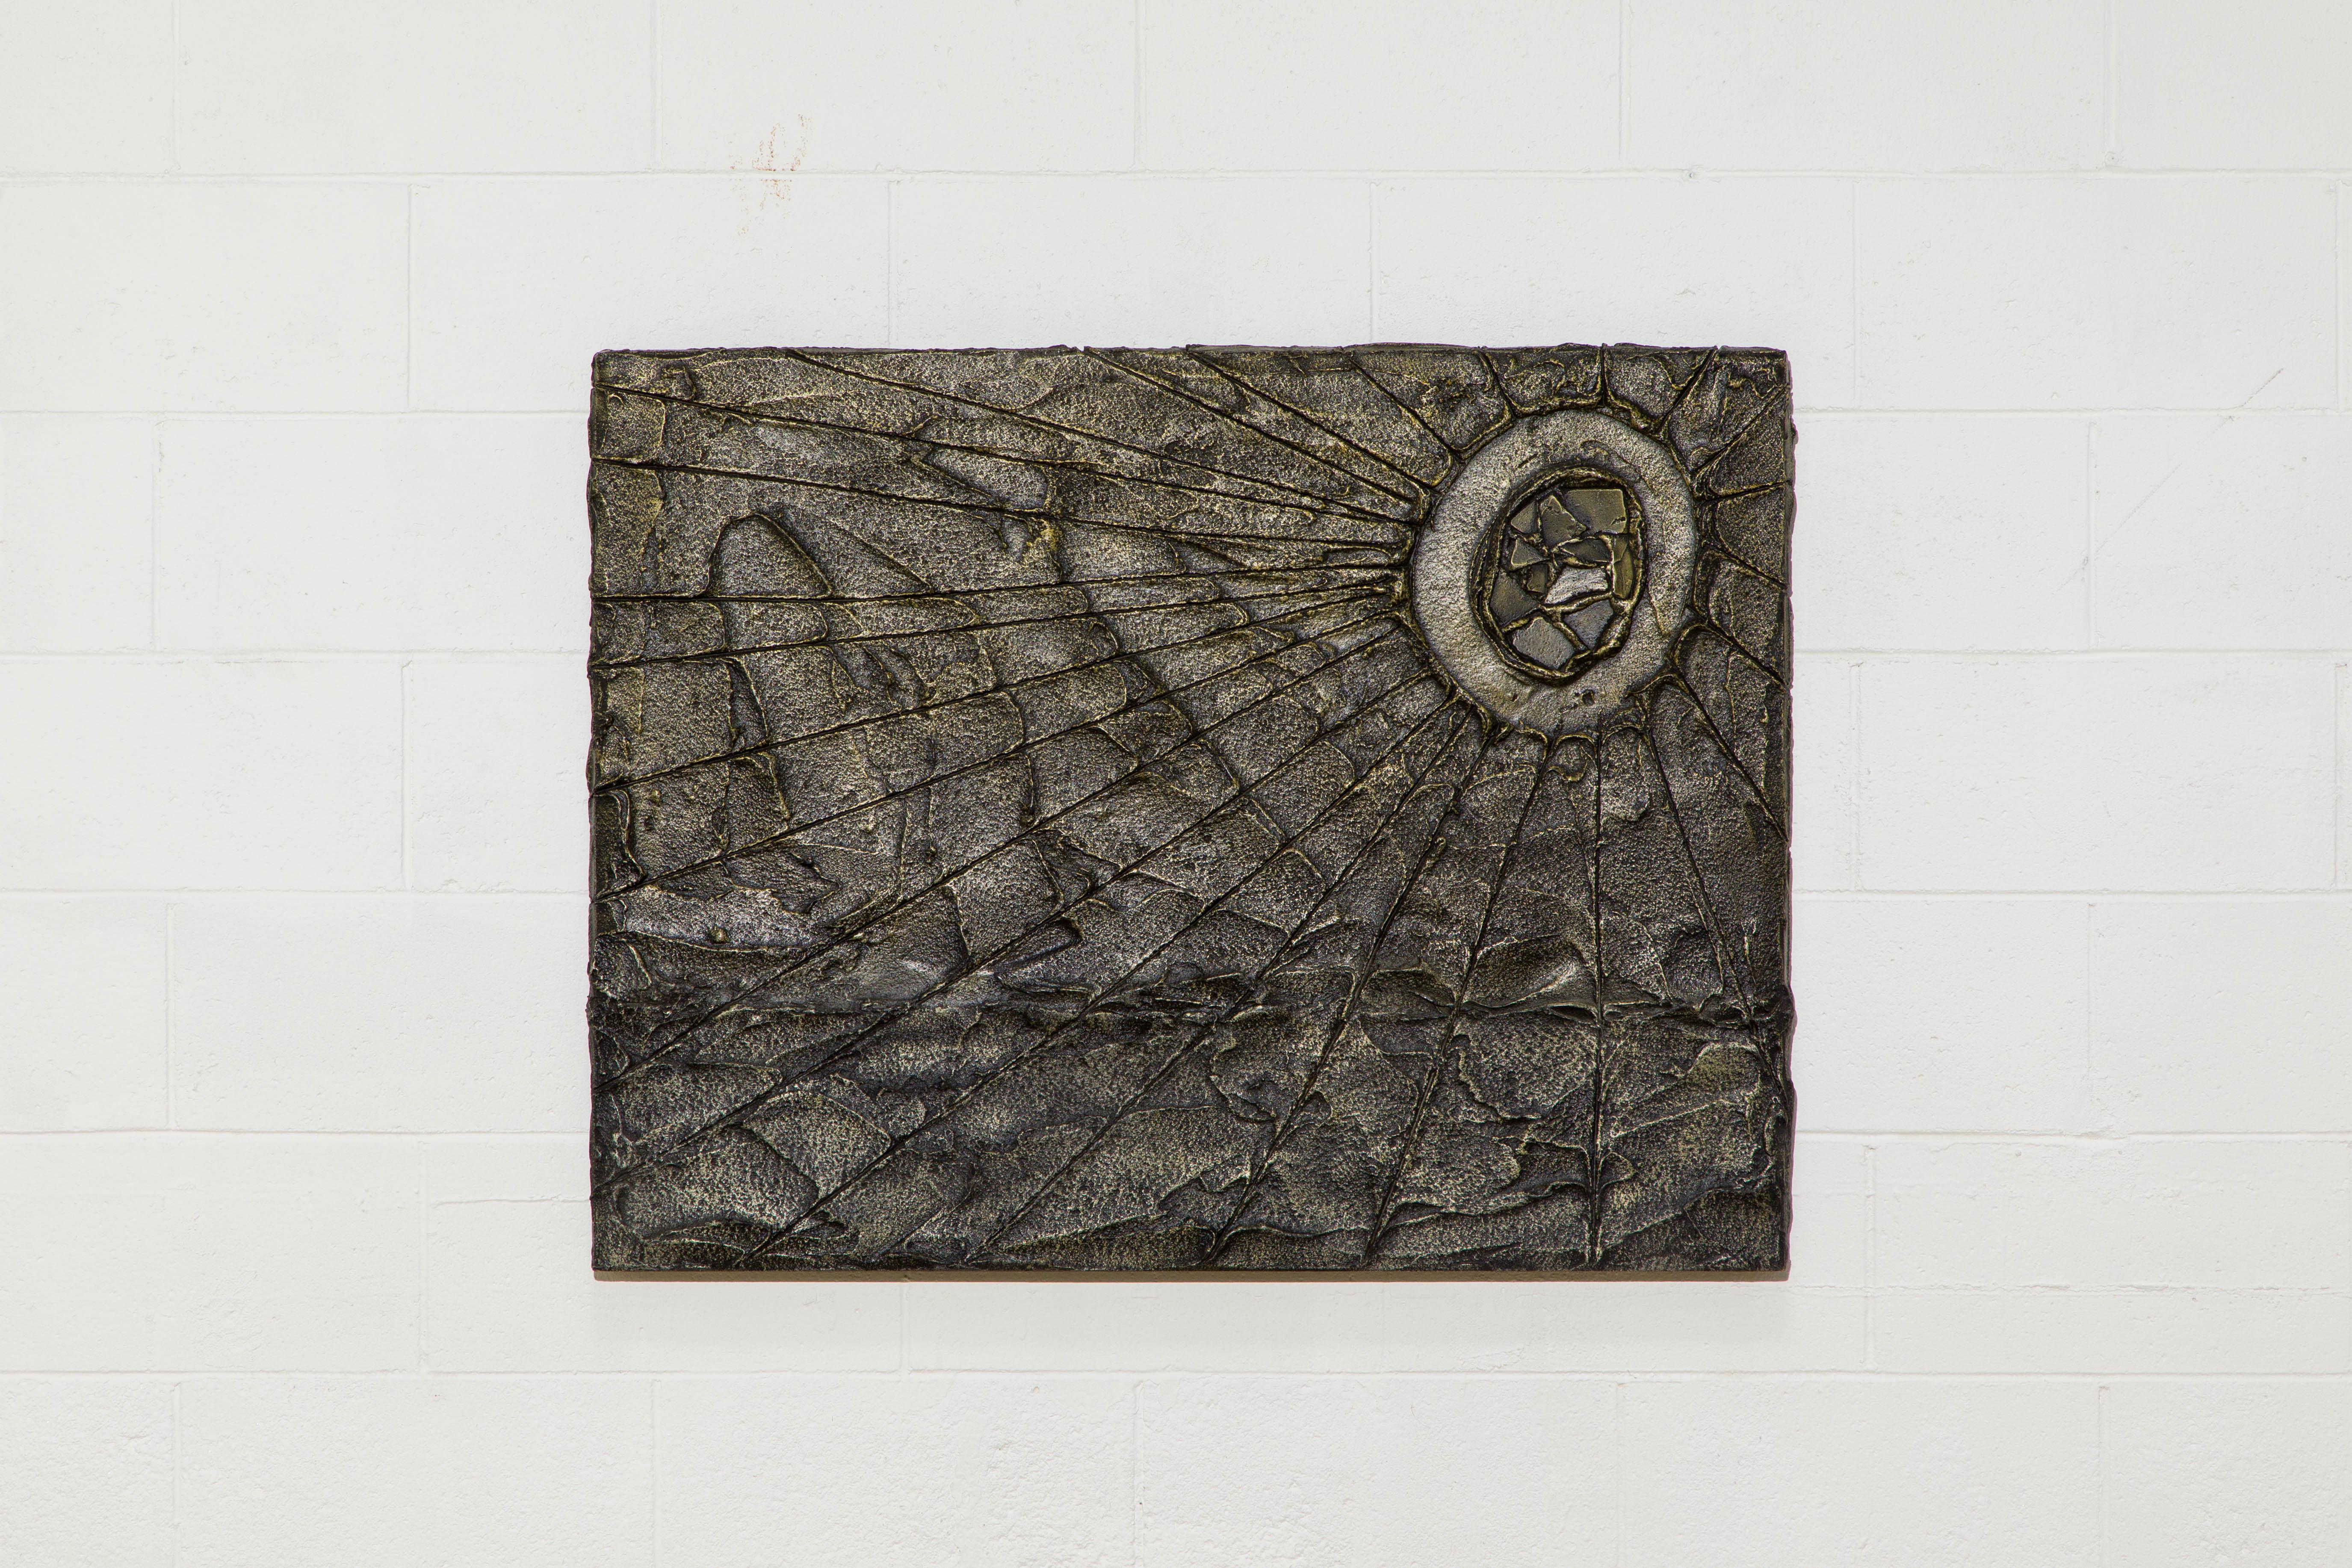 American Brutalist Bronzed Resin Wall Relief Sculpture, Style of Paul Evans, c 1970s For Sale